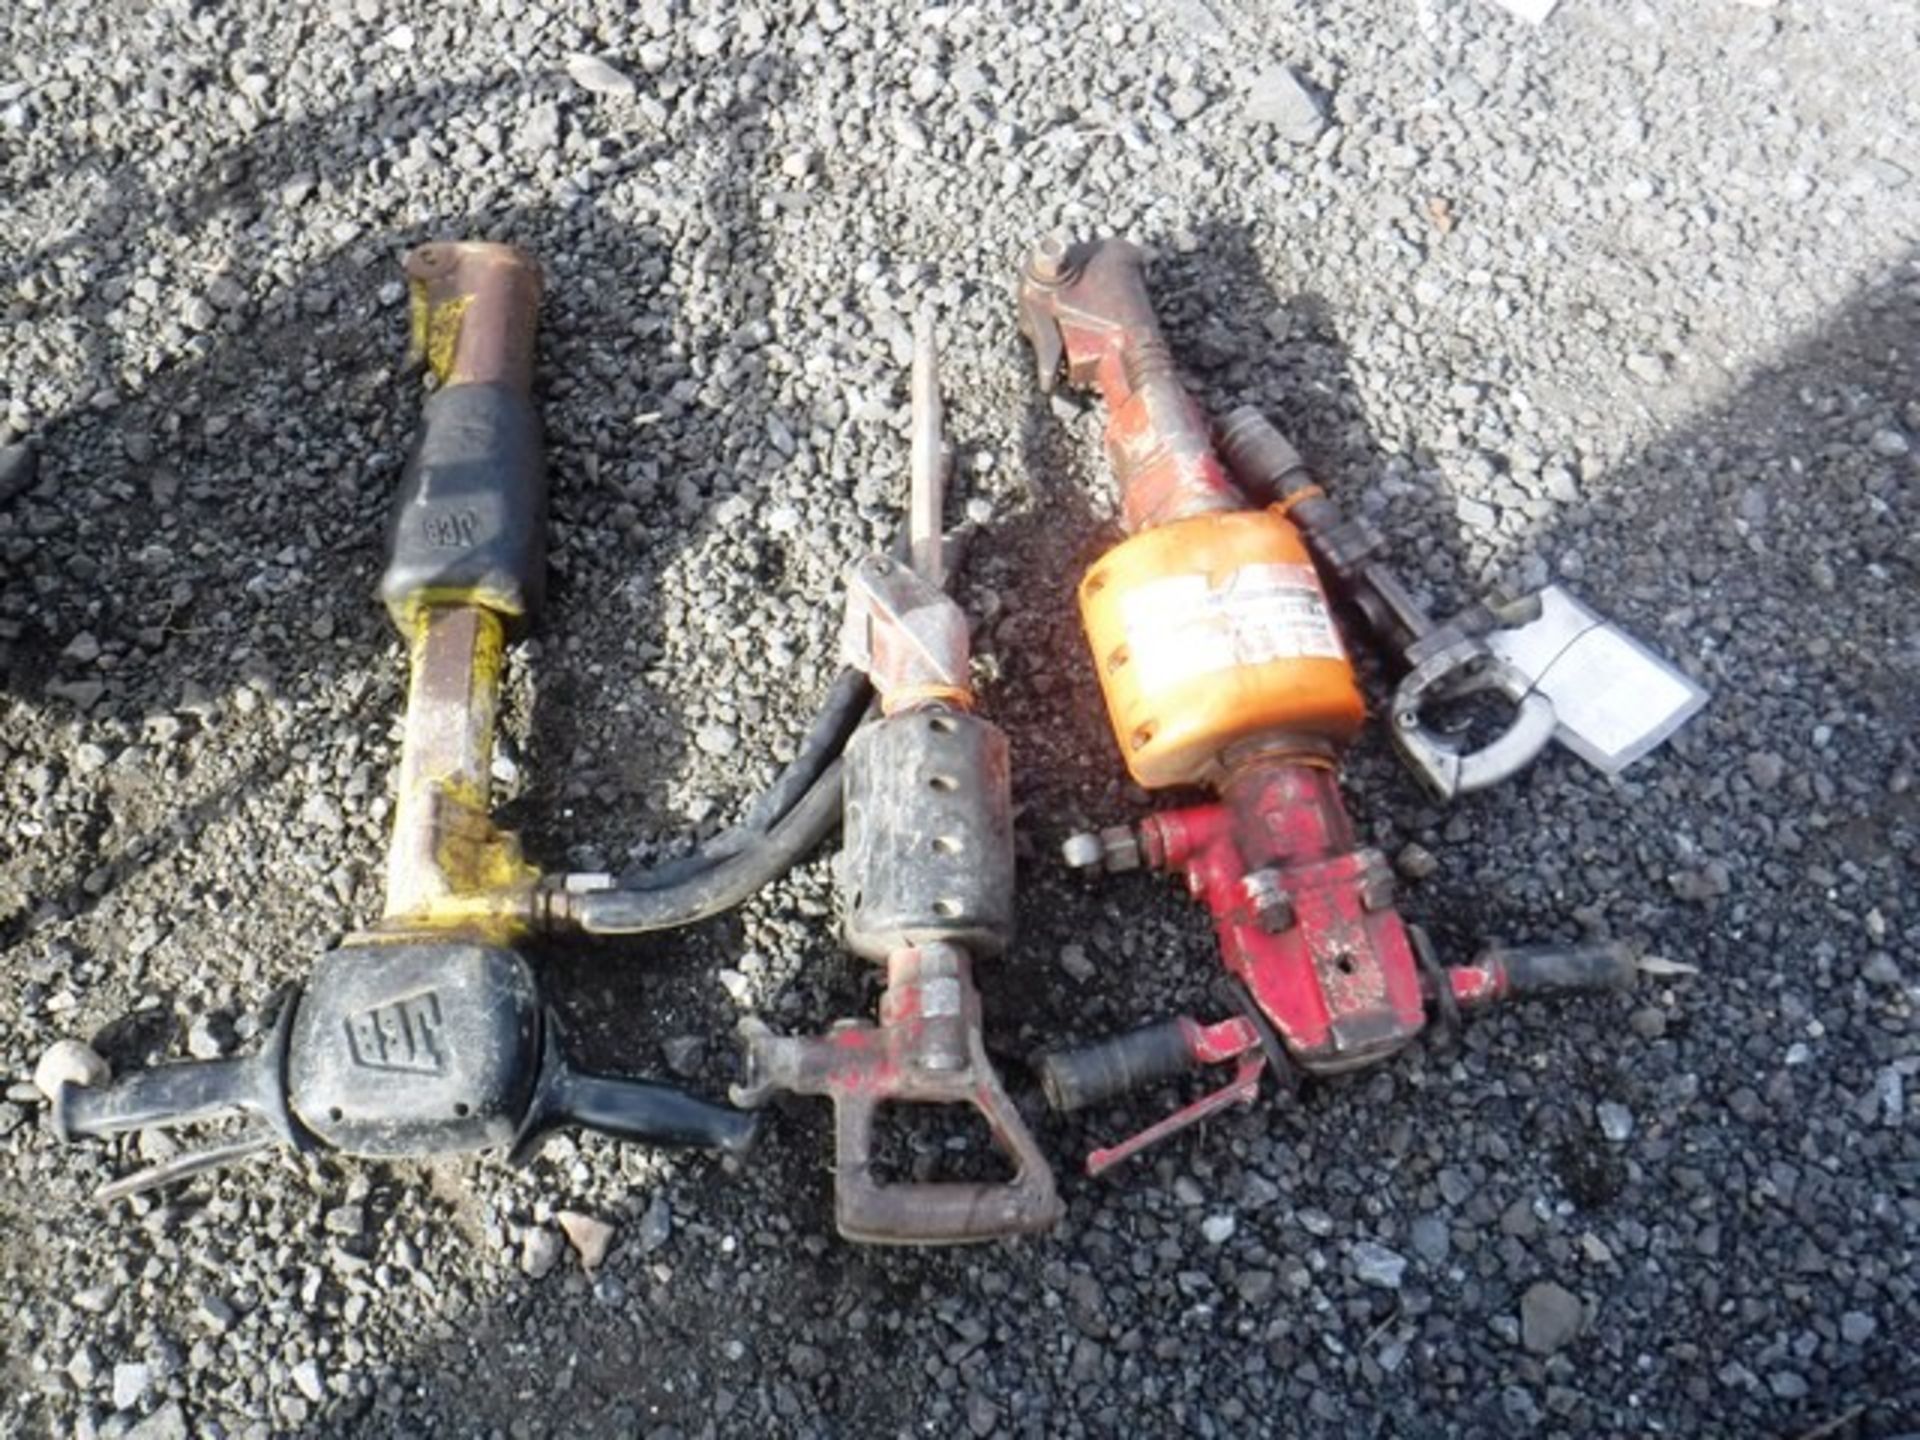 4 PNEUMATIC BREAKERS (ONE SPARES OR REPAIR)**REPOSSESSED - DIRECT FROM FINANCE COMPANY**